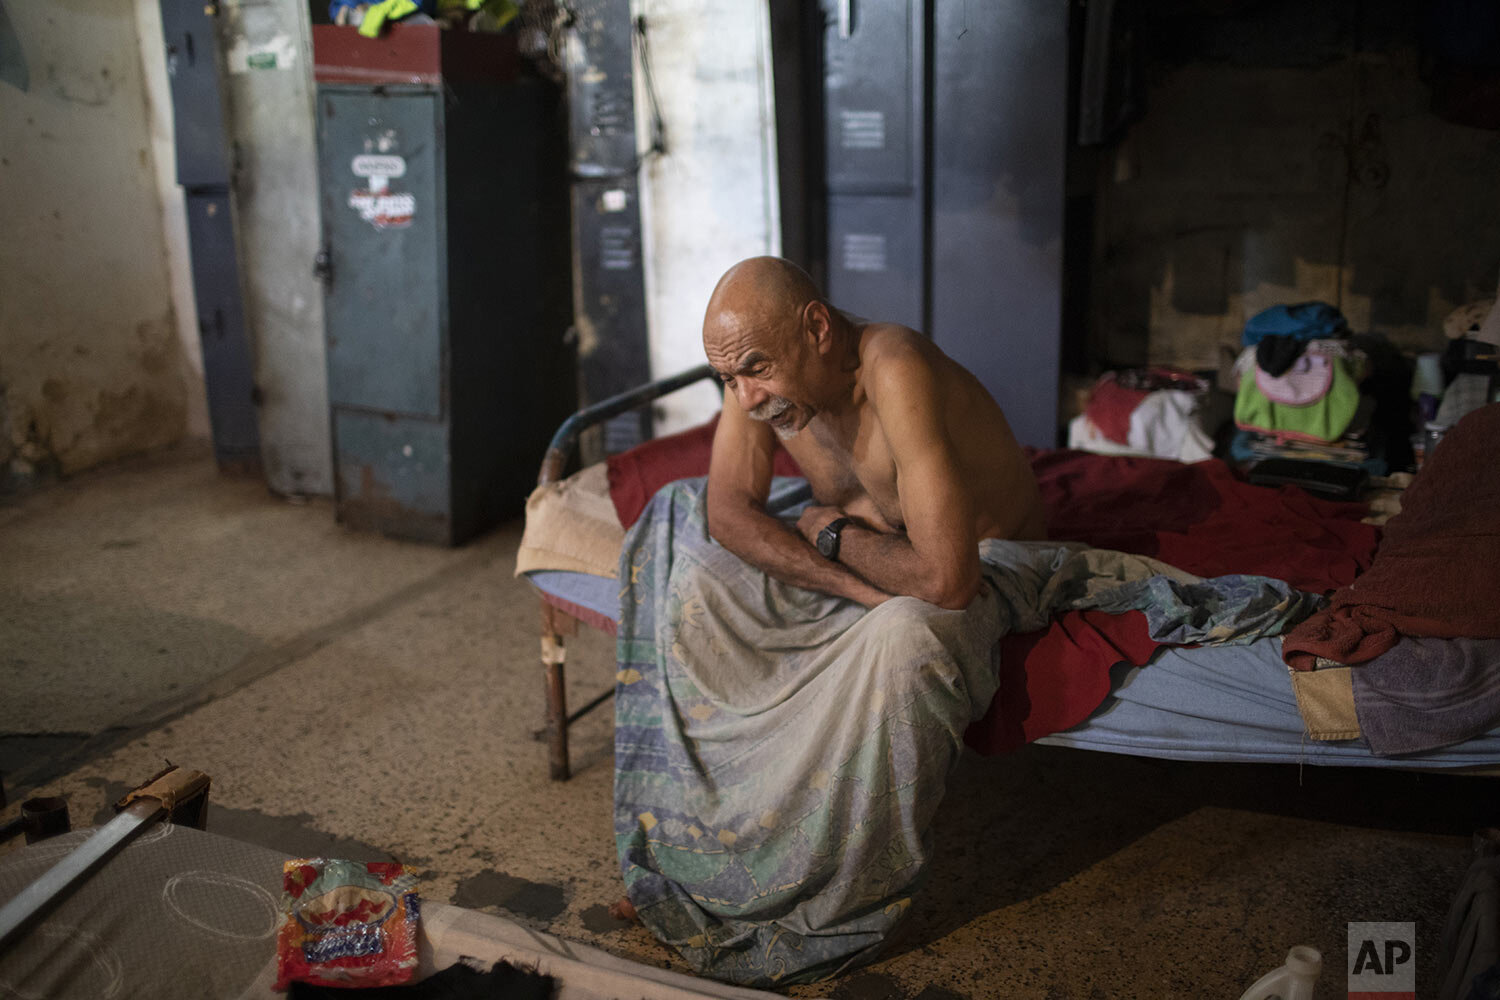  Luis Rocio sits on his bed inside a shared bedroom at the Nosotros Unidos Foundation, a home for the elderly where he has been living for over a year, just before the COVID-19 pandemic began in Caracas, Venezuela, May 14, 2021. Rocio, 70, said he wo